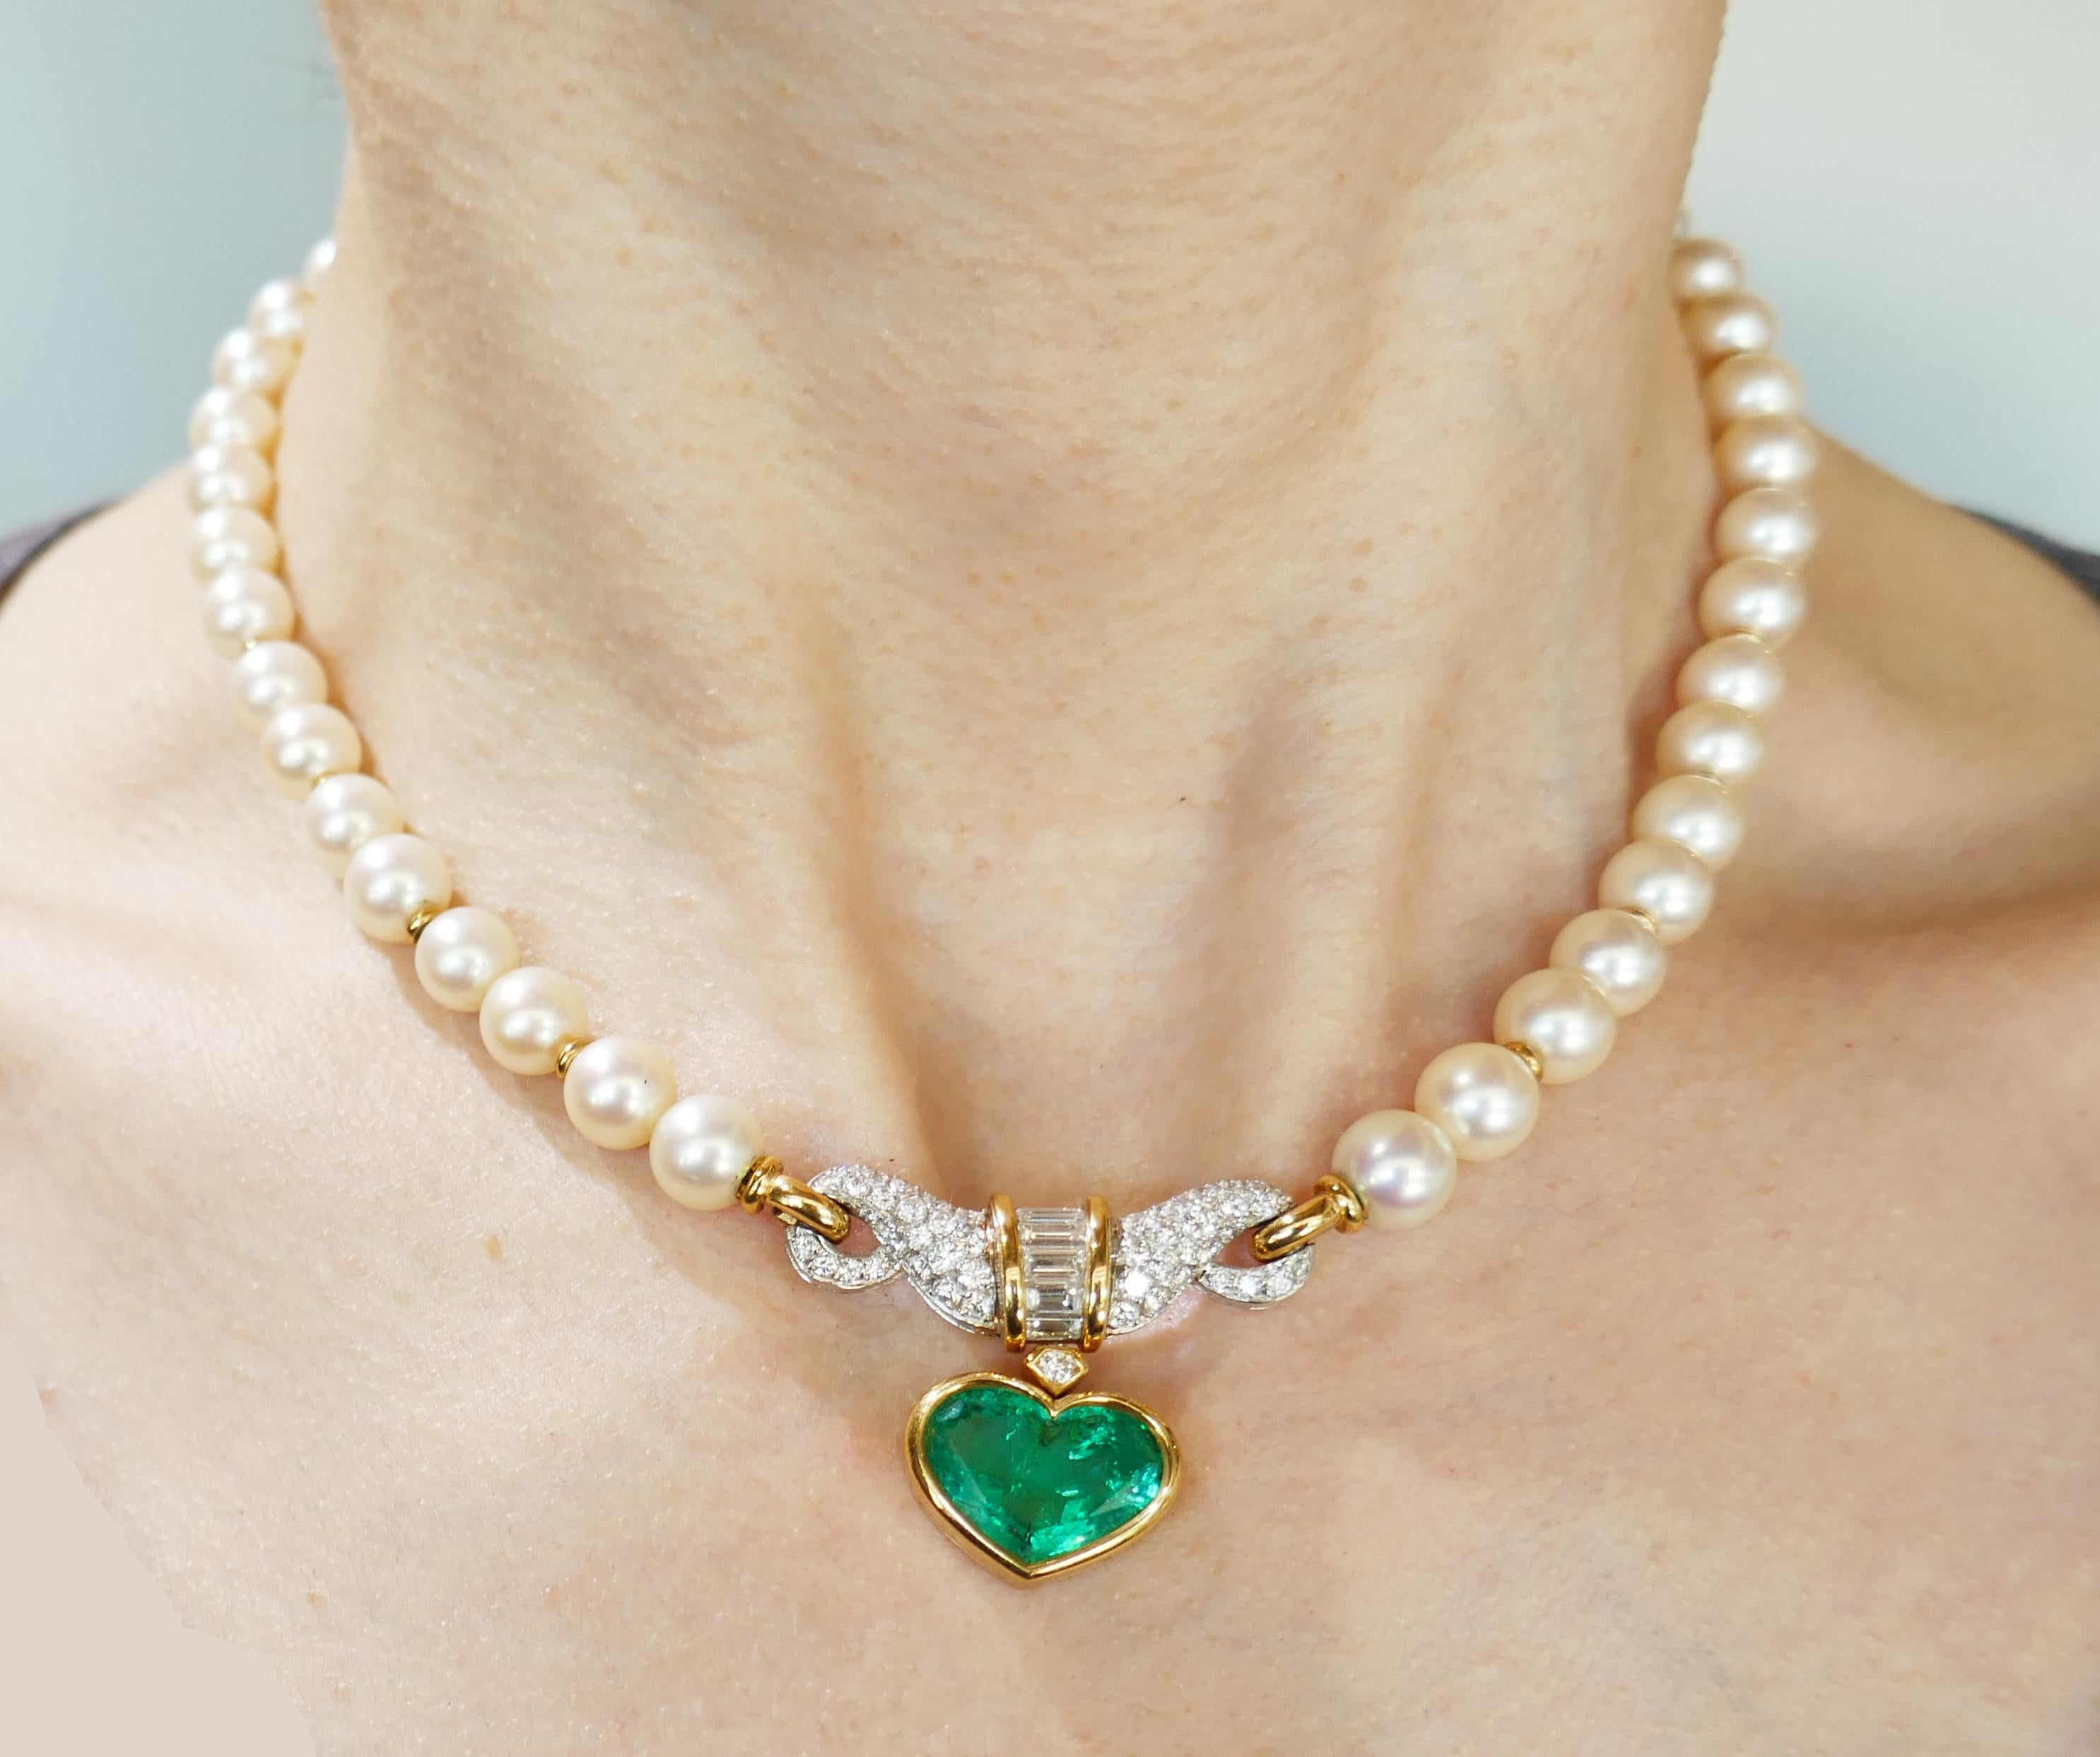 Elegant and timeless necklace created by Bulgari in Italy in the 1980s. Features forty five Akoya pearls, a heart shape faceted emerald set in 18k yellow gold and accented with round brilliant and baguette cut diamonds.
Beautiful classy and